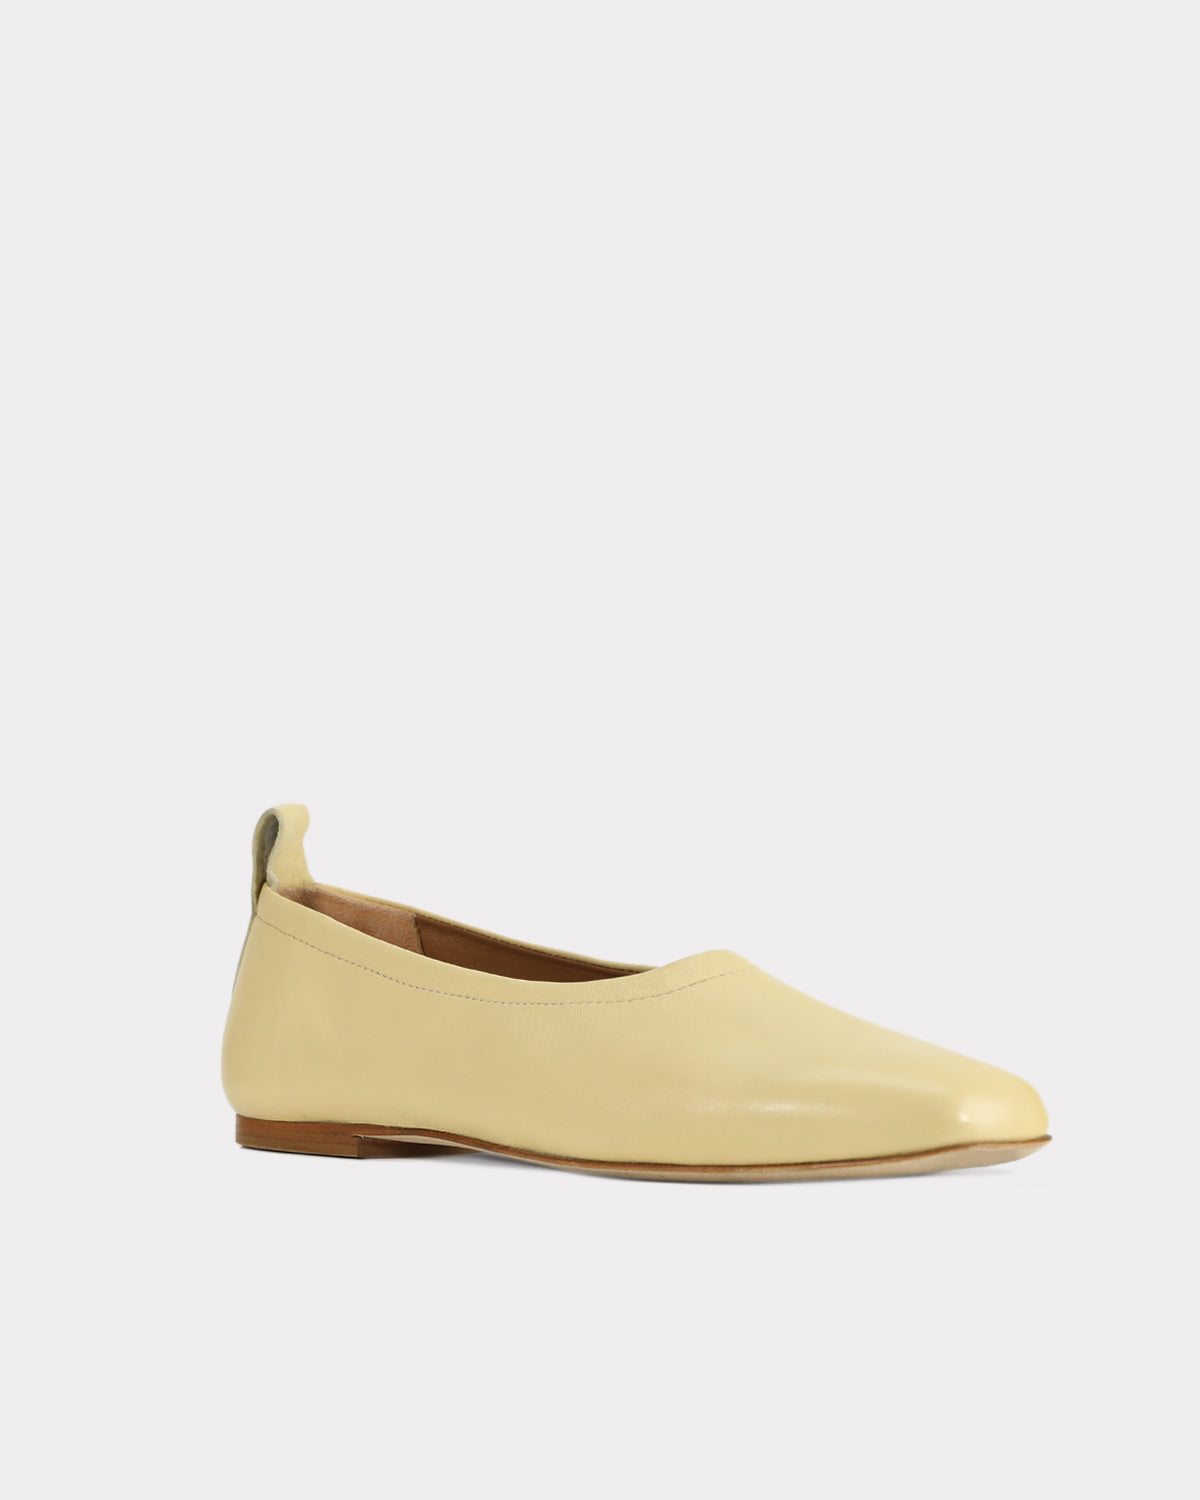 ethically sourced leather flats in pastel yellow